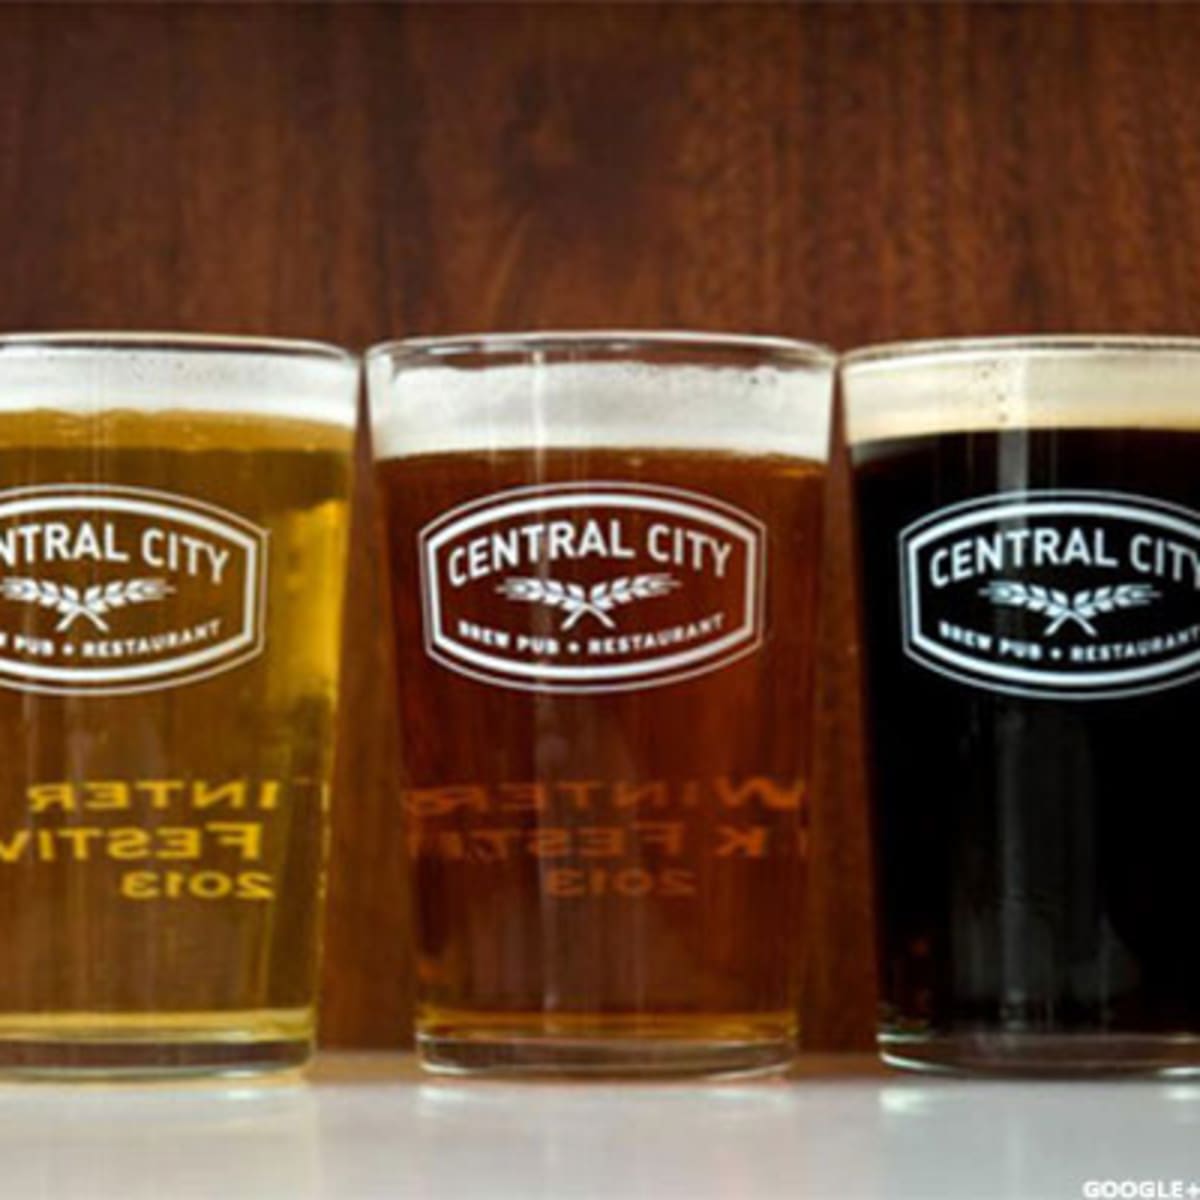 The 5 Best Beer Glasses